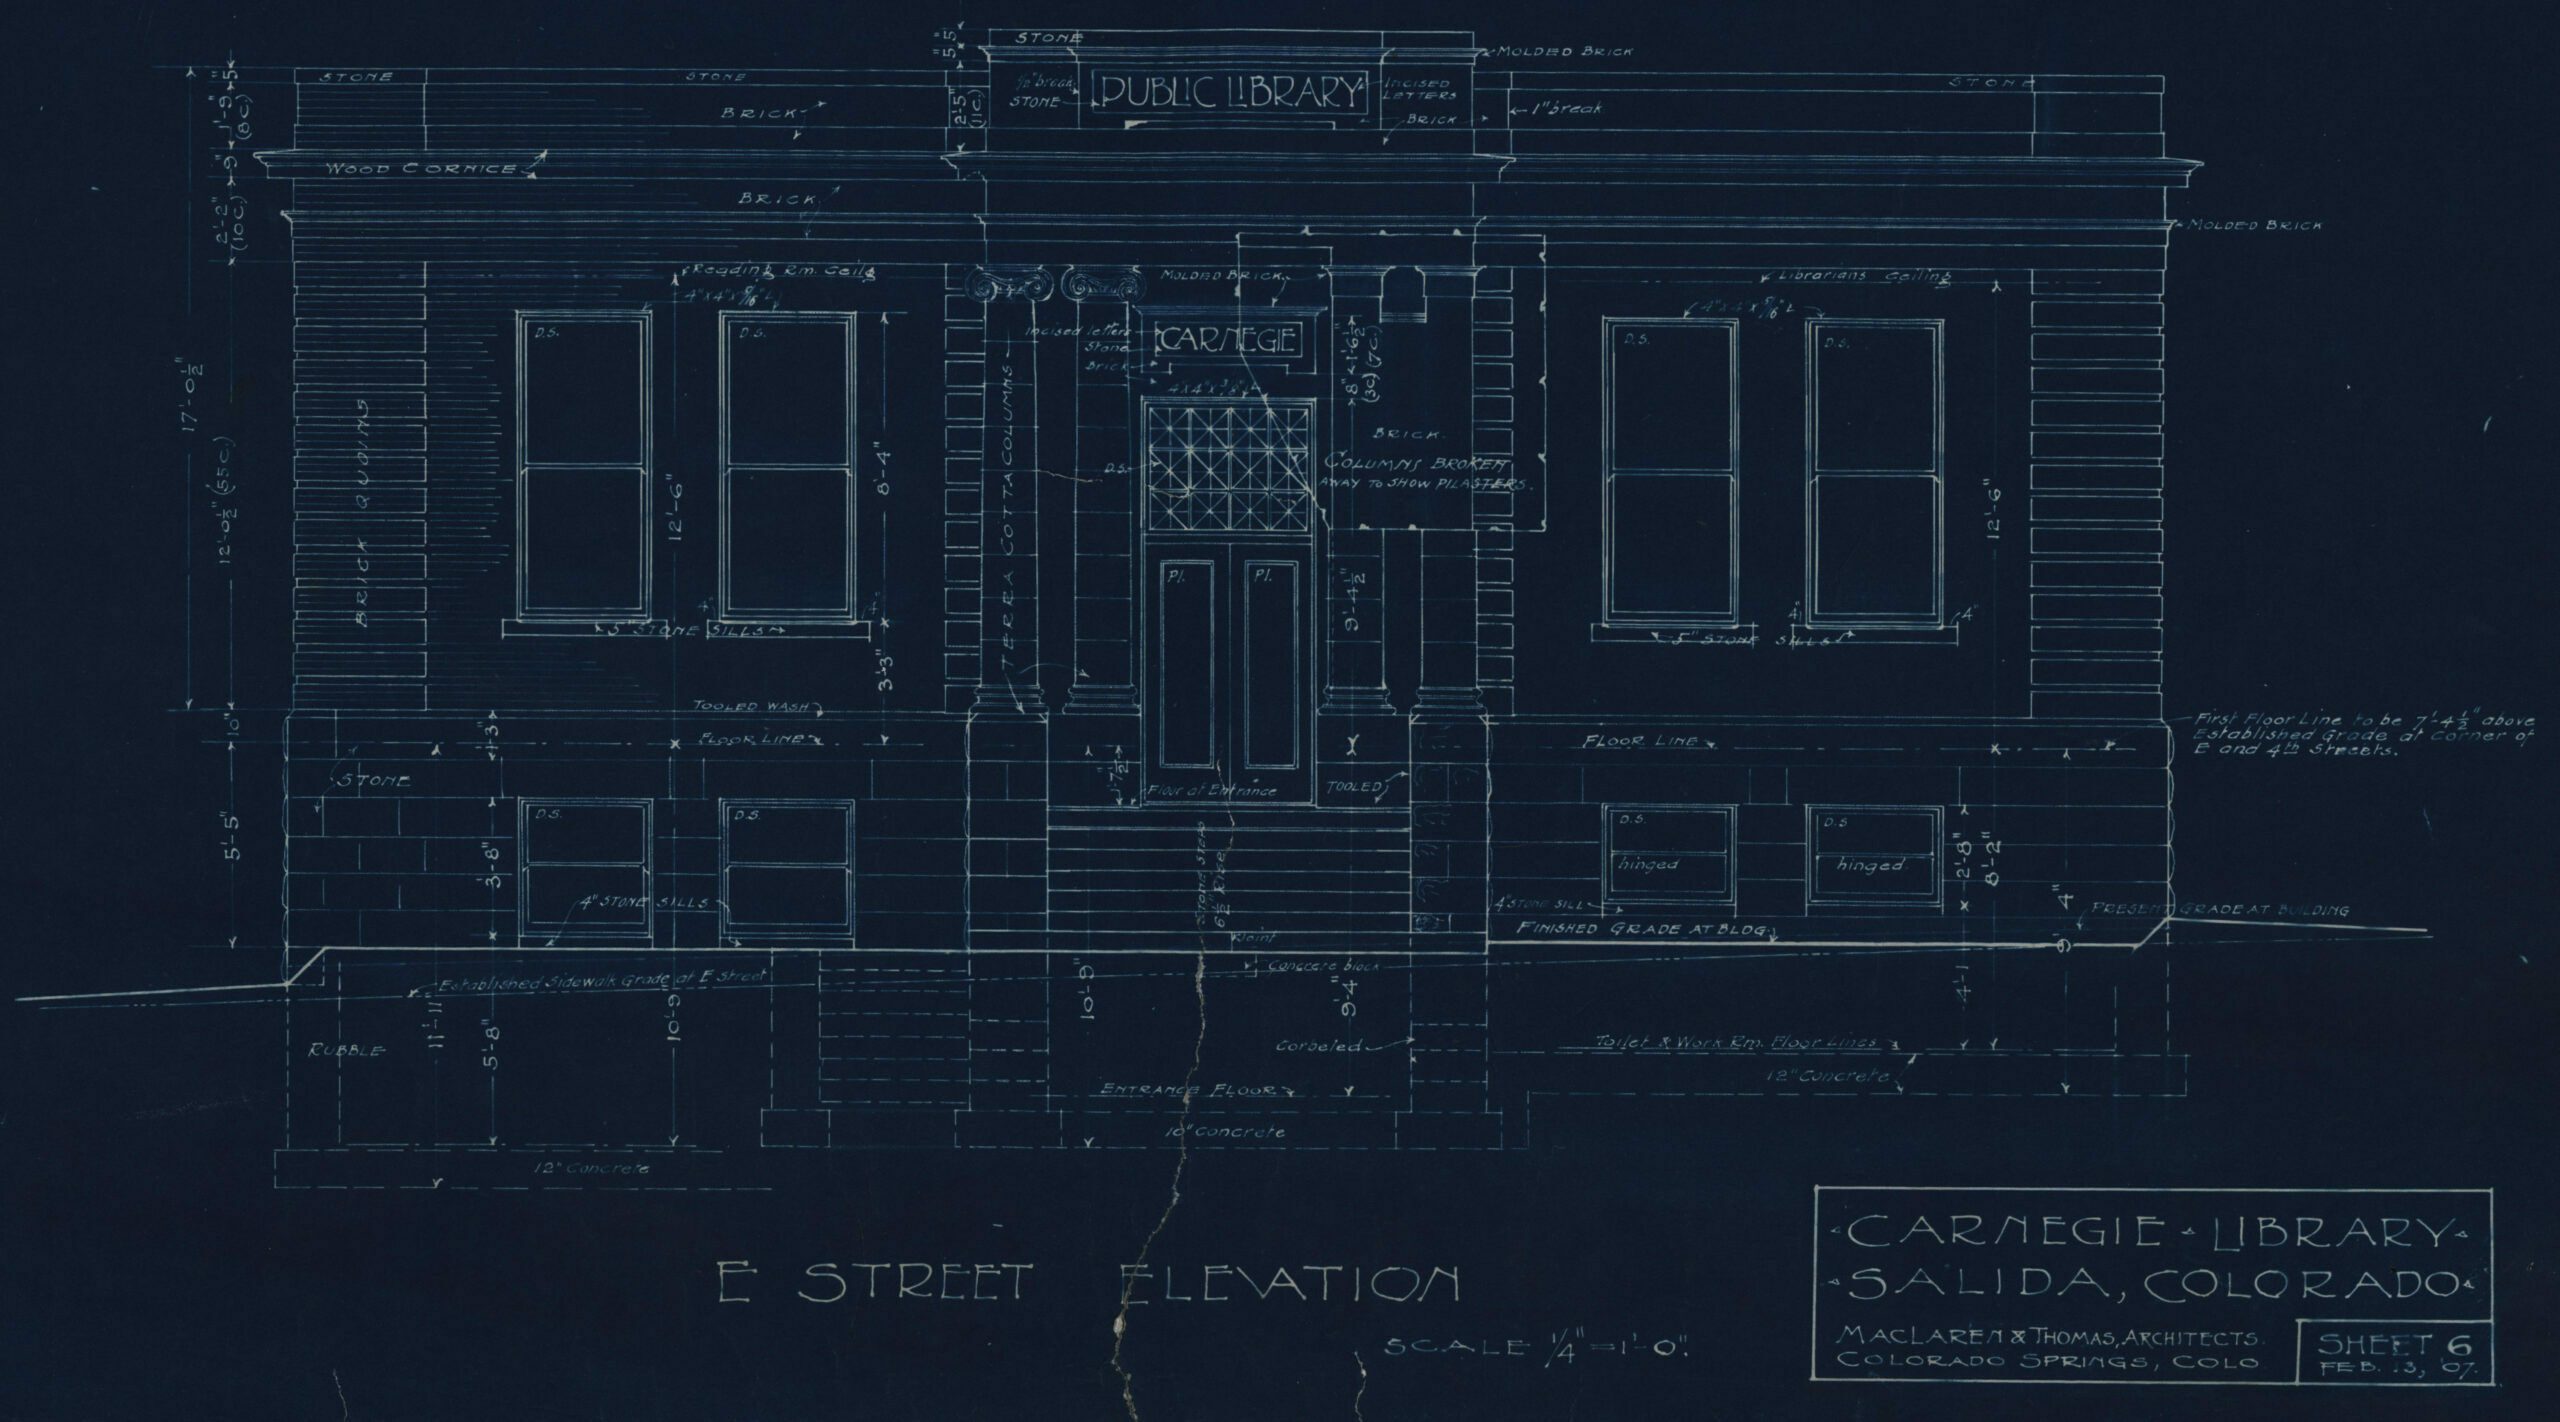 E Street Elevation blueprint of the Salida Library – Salida Library Collection